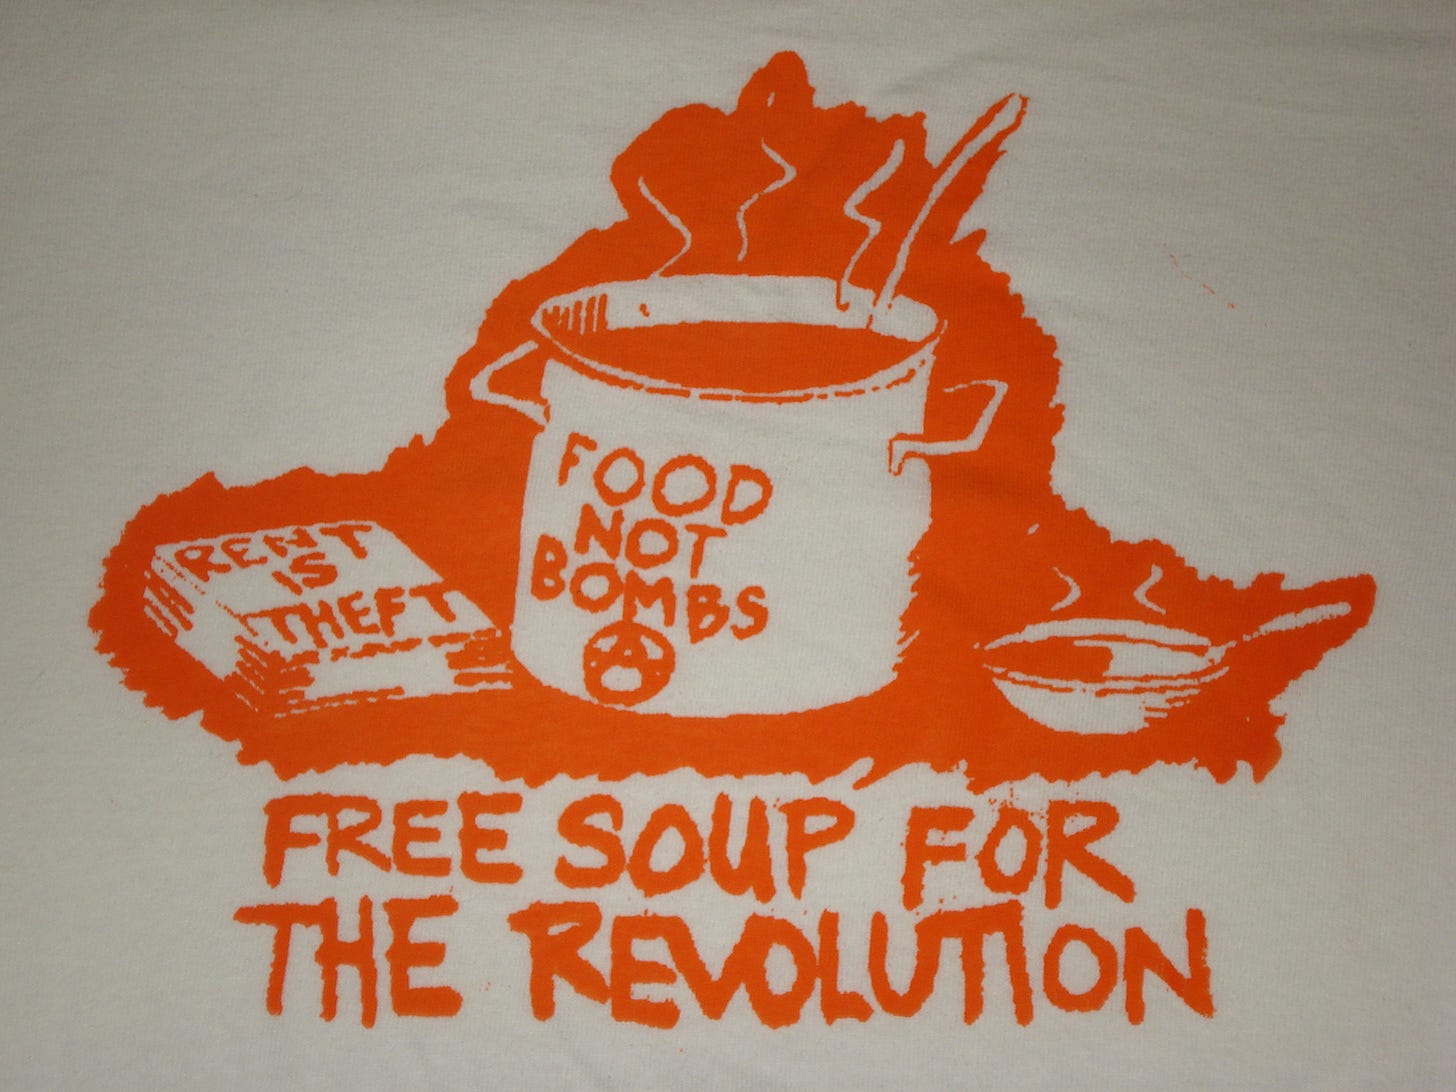 Soup pot that says "Food Not Bombs" next to book that says "Rent Is Theft." Caption says "Free soup for the revolution."